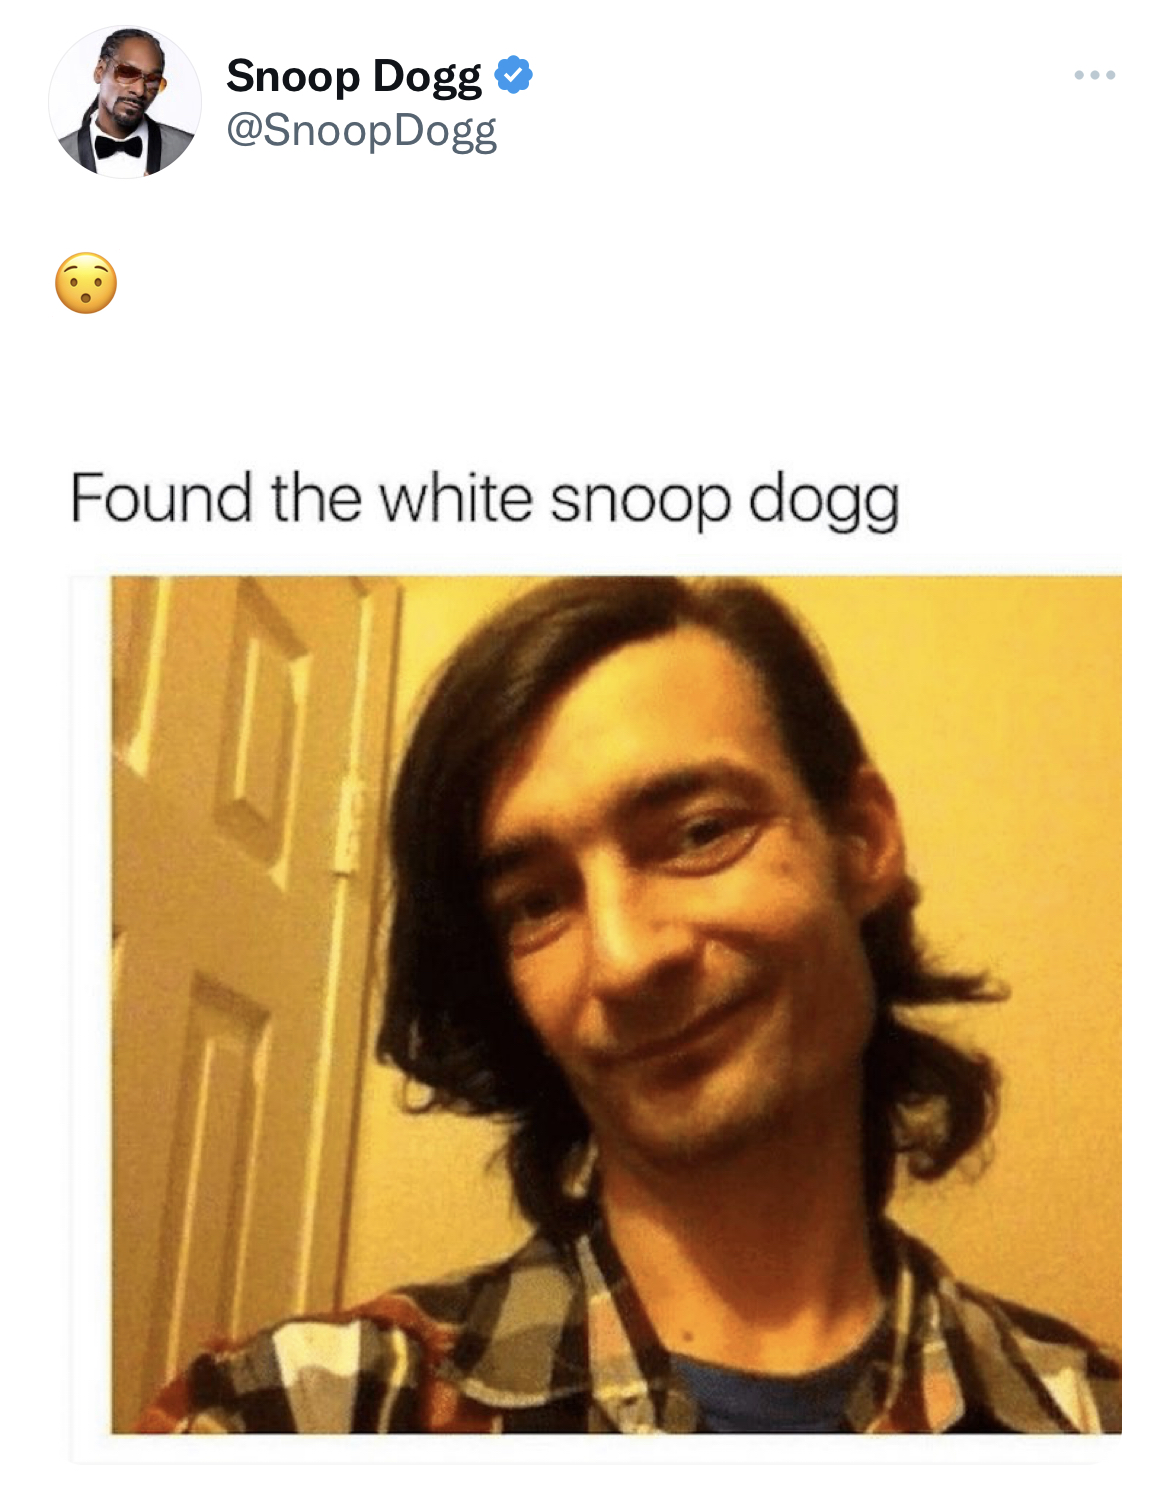 Tweets dunking on celebs - hairstyle - Snoop Dogg Dogg Found the white snoop dogg